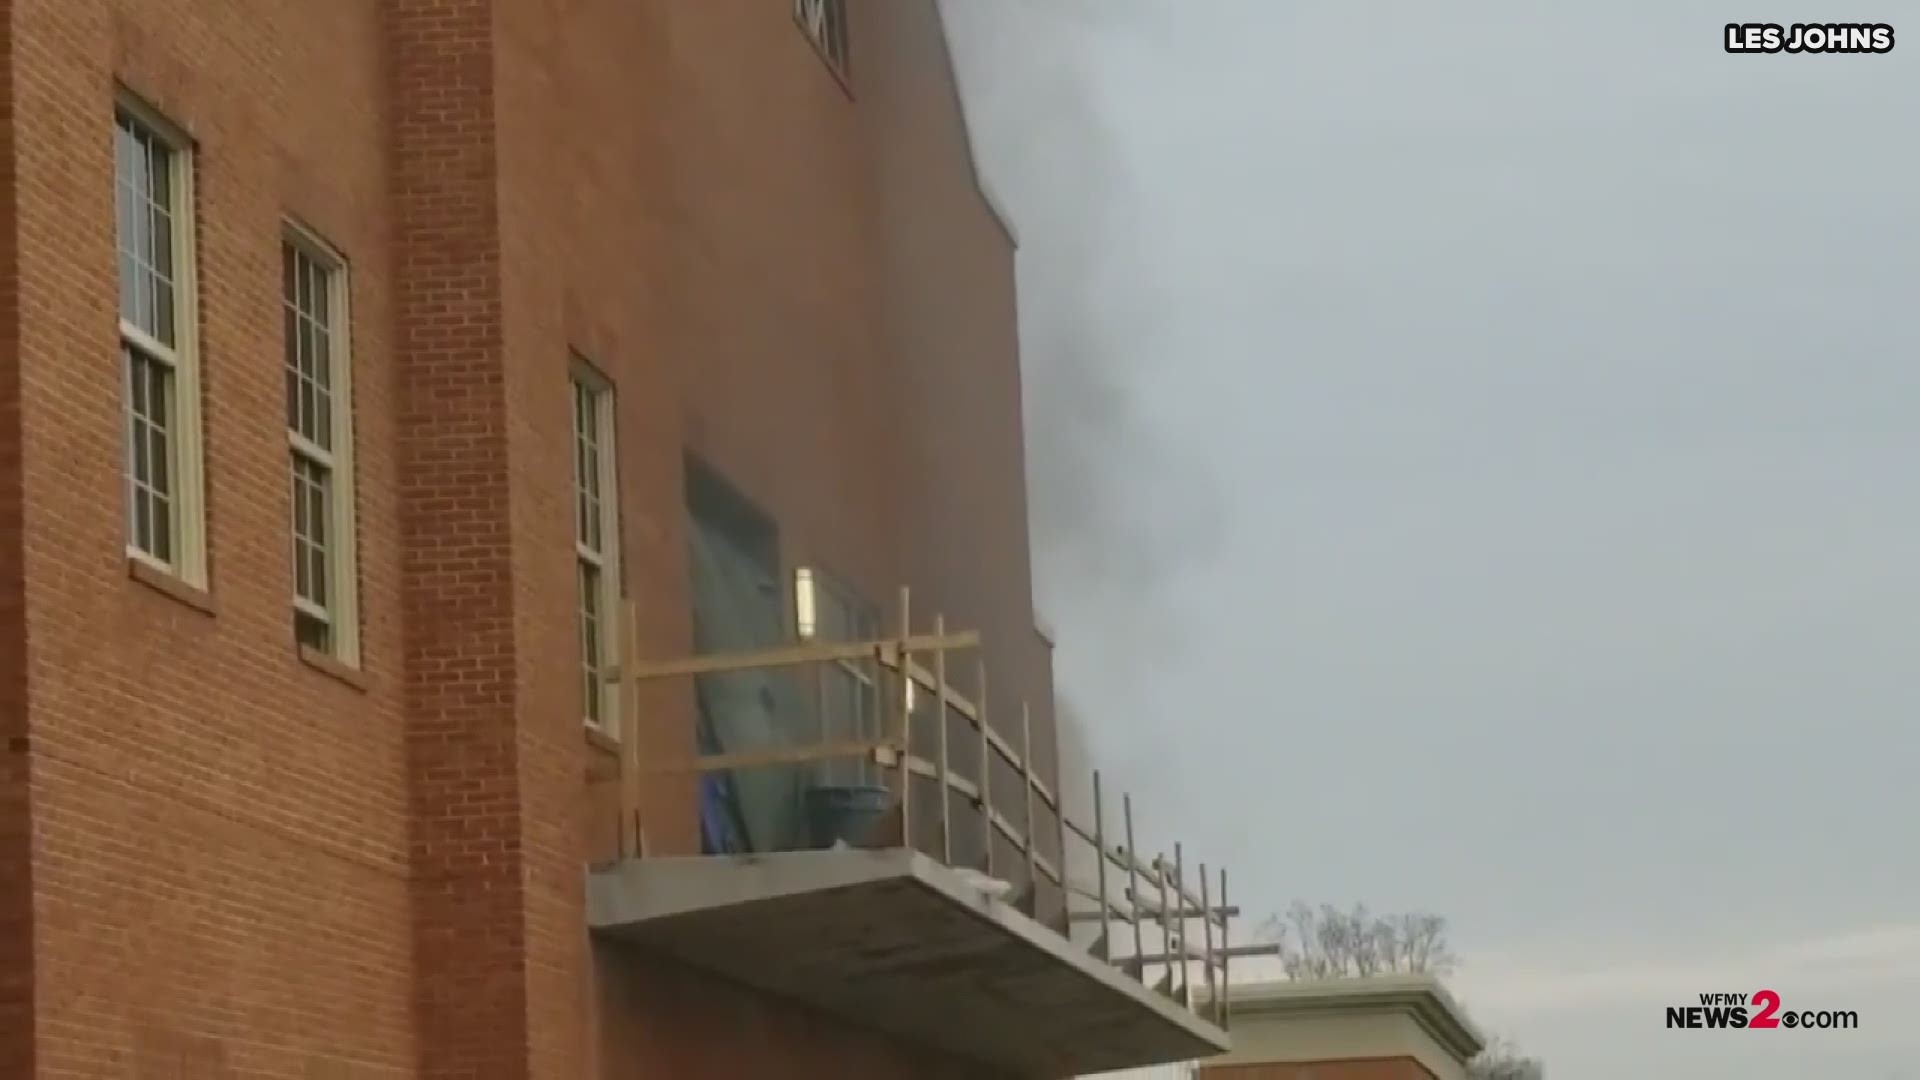 A fire broke out at the Sutton Sports Performance Center in Winston-Salem Thursday.